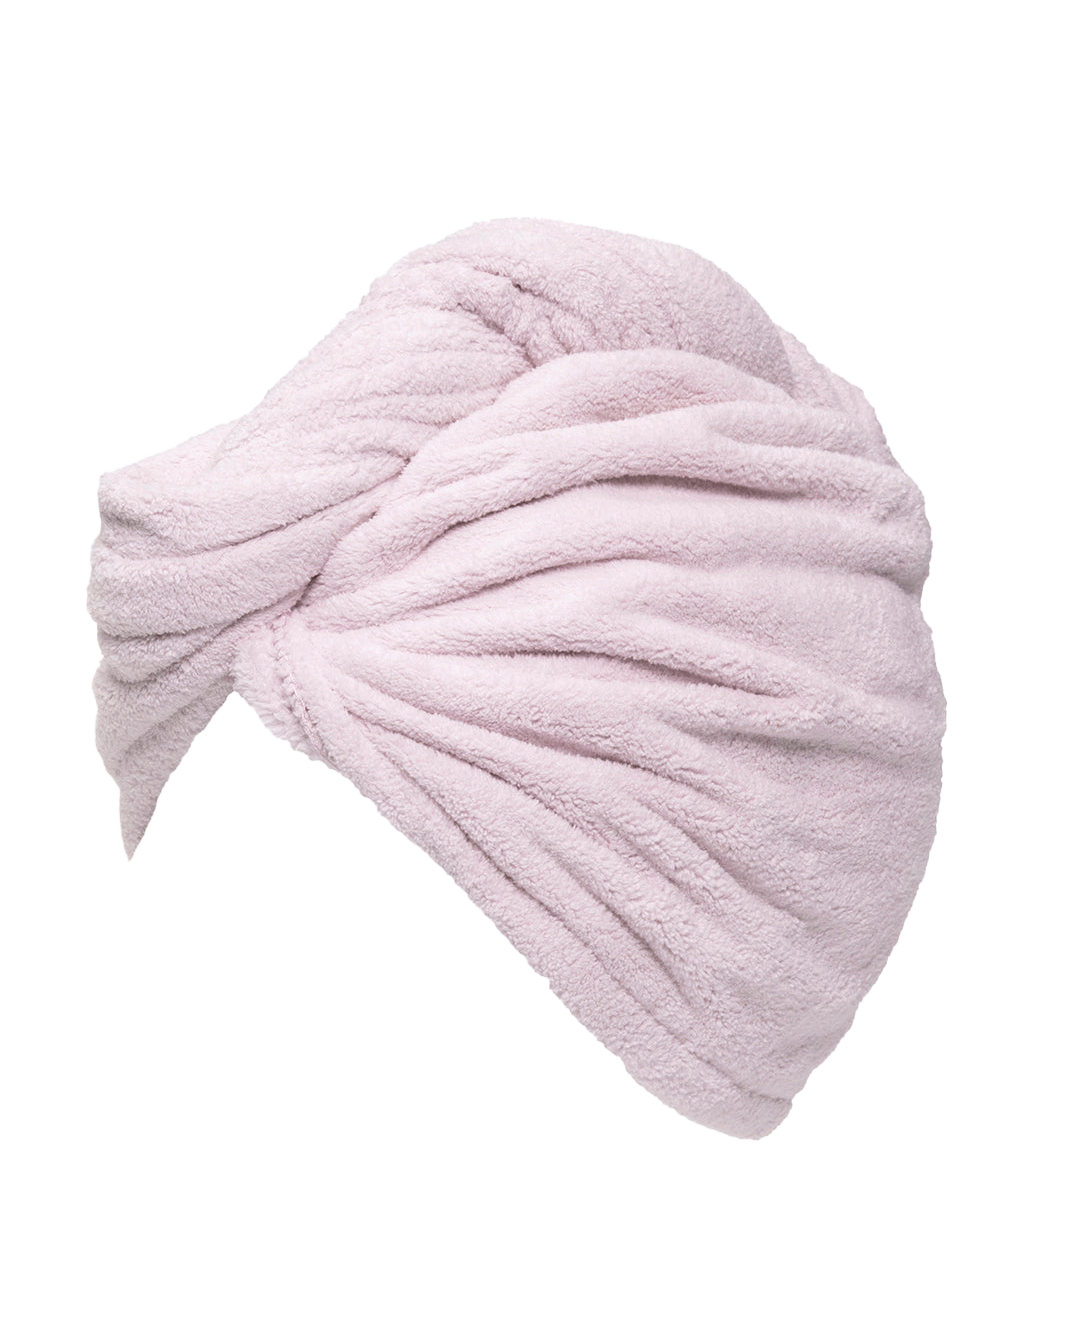 Body and Head Towel Set 